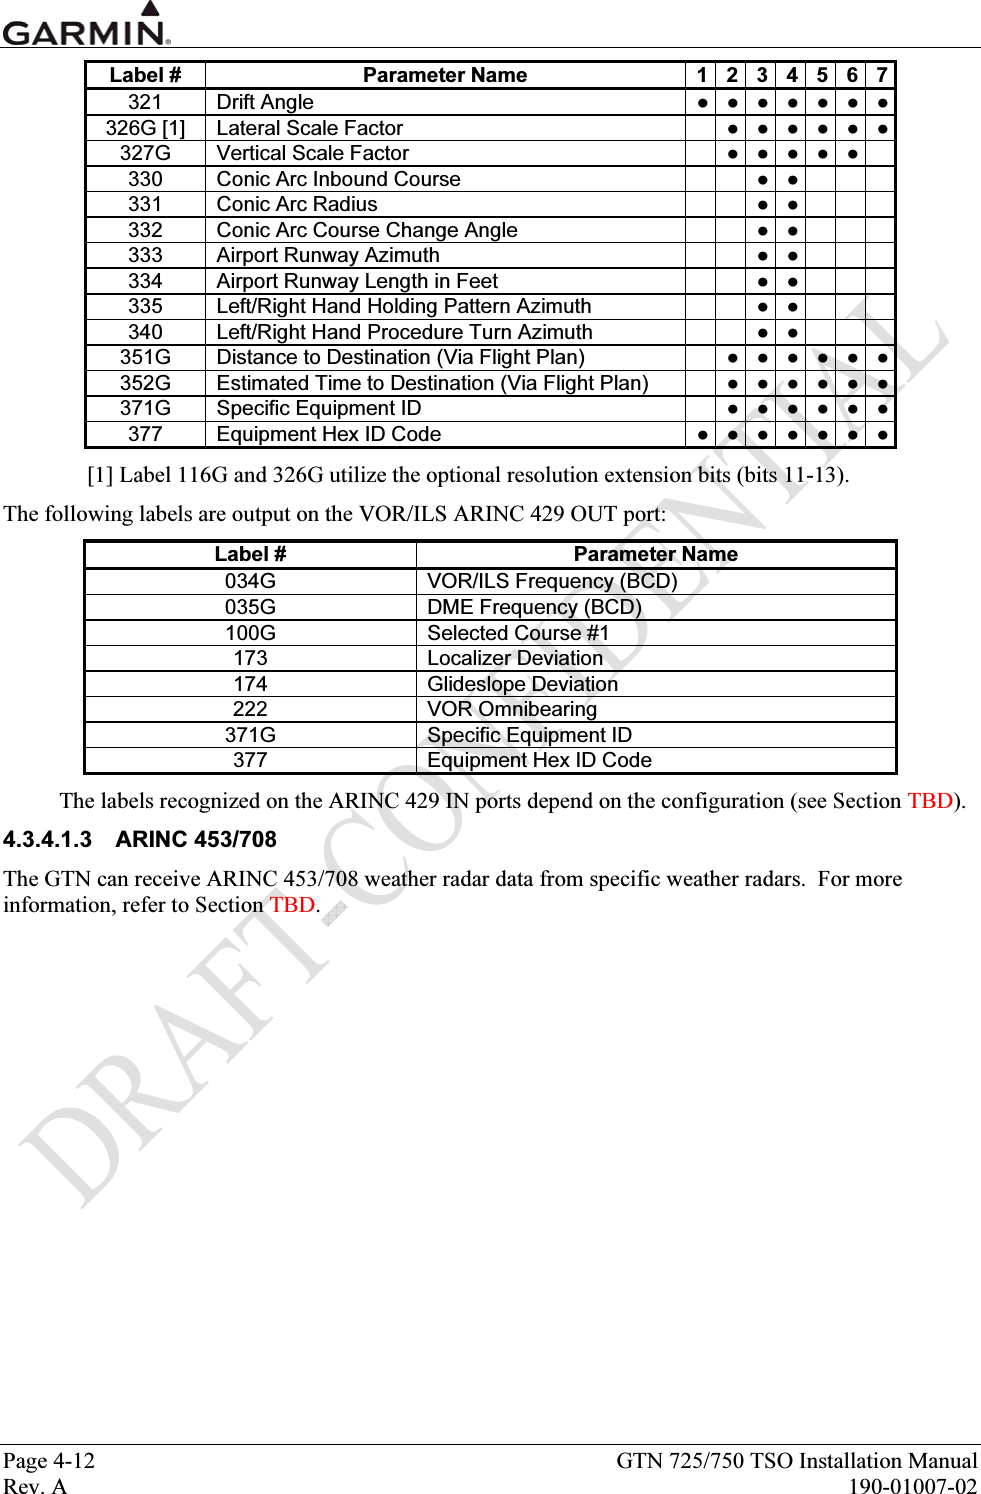  Page 4-12  GTN 725/750 TSO Installation Manual Rev. A  190-01007-02 Label #  Parameter Name  1 2 3  4  5  6  7321  Drift Angle  ● ● ● ● ● ● ●326G [1]  Lateral Scale Factor    ● ● ● ● ● ●327G  Vertical Scale Factor    ● ● ● ● ●  330  Conic Arc Inbound Course    ● ●    331  Conic Arc Radius    ● ●    332  Conic Arc Course Change Angle      ●  ●       333  Airport Runway Azimuth    ● ●    334  Airport Runway Length in Feet    ● ●    335  Left/Right Hand Holding Pattern Azimuth      ●  ●       340  Left/Right Hand Procedure Turn Azimuth      ●  ●       351G  Distance to Destination (Via Flight Plan)    ● ●  ●  ●  ●  ●352G  Estimated Time to Destination (Via Flight Plan)    ● ●  ●  ●  ●  ●371G  Specific Equipment ID    ● ● ● ● ● ●377  Equipment Hex ID Code  ● ● ● ● ● ● ●[1] Label 116G and 326G utilize the optional resolution extension bits (bits 11-13). The following labels are output on the VOR/ILS ARINC 429 OUT port: Label #  Parameter Name 034G  VOR/ILS Frequency (BCD) 035G  DME Frequency (BCD) 100G Selected Course #1 173 Localizer Deviation 174 Glideslope Deviation 222 VOR Omnibearing 371G  Specific Equipment ID 377  Equipment Hex ID Code The labels recognized on the ARINC 429 IN ports depend on the configuration (see Section TBD). 4.3.4.1.3 ARINC 453/708 The GTN can receive ARINC 453/708 weather radar data from specific weather radars.  For more information, refer to Section TBD. 